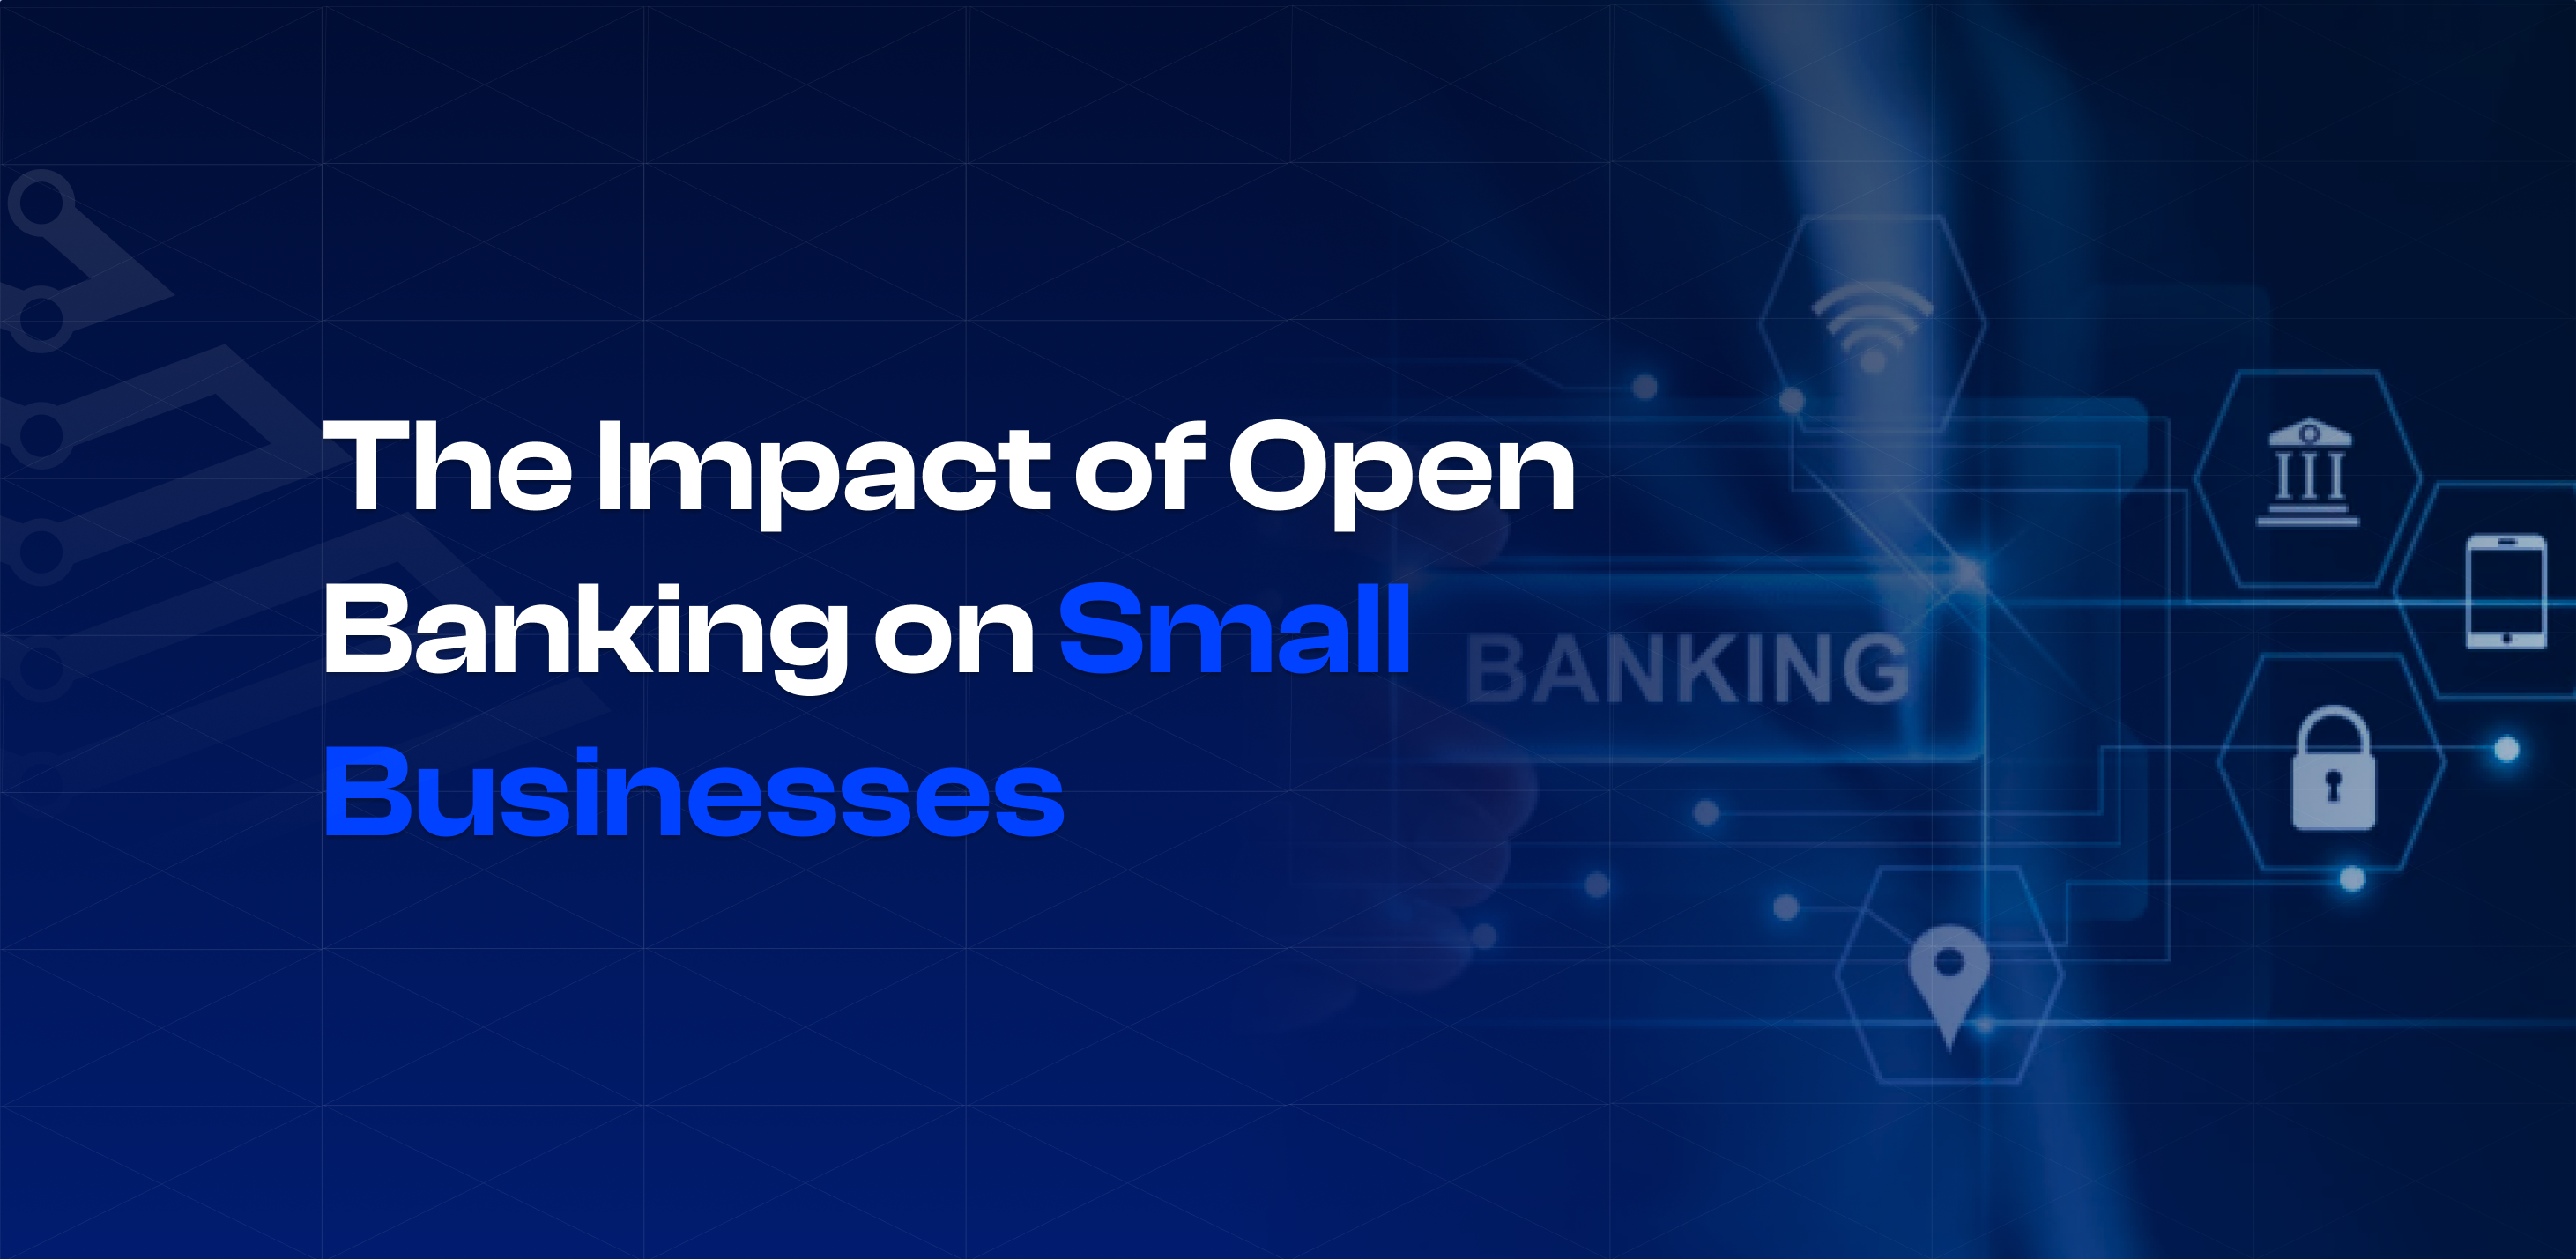 The Impact of Open Banking on Small Businesses